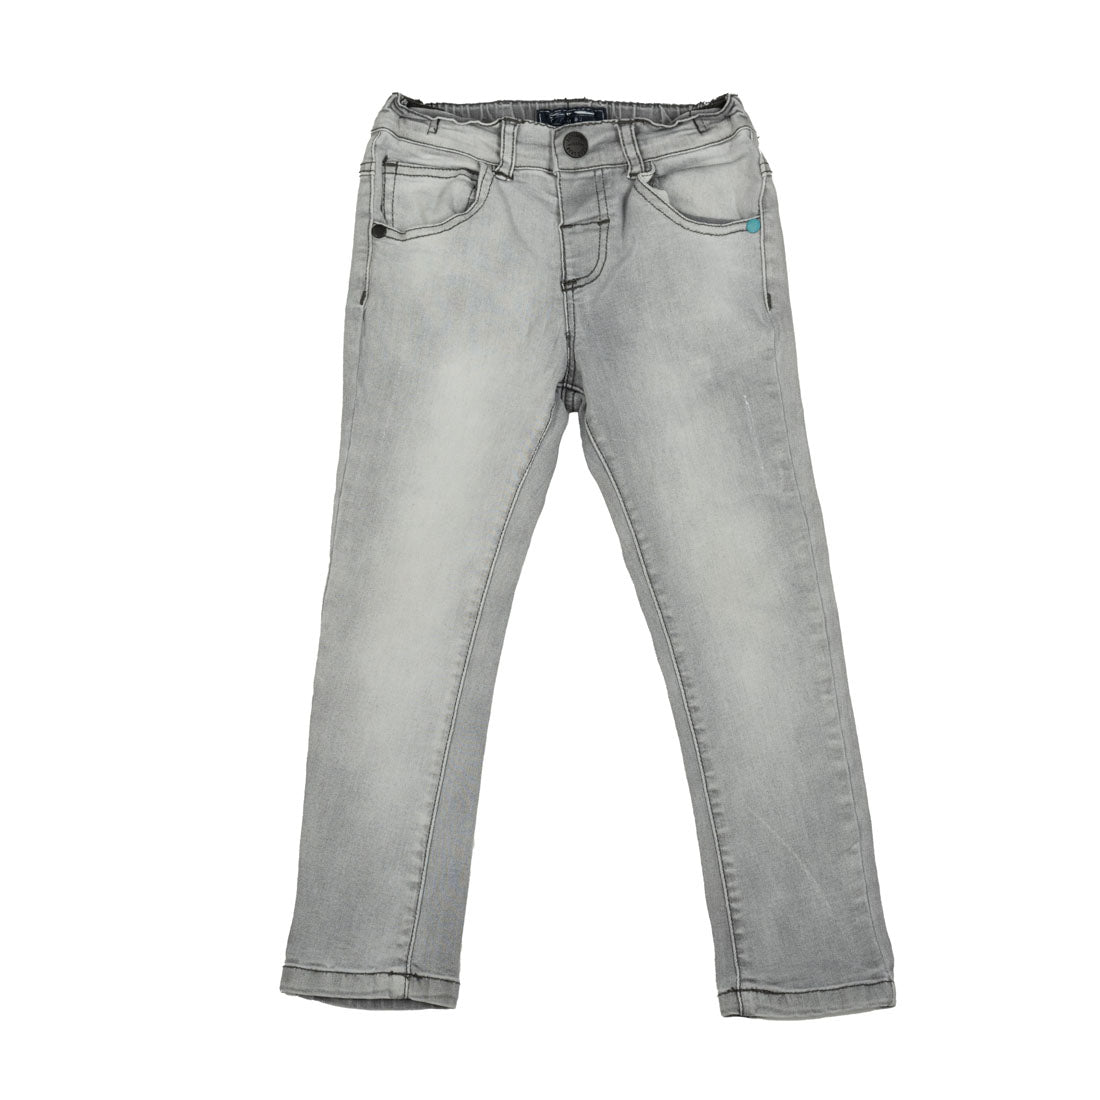 Next Jeans For Boys - mymadstore.com